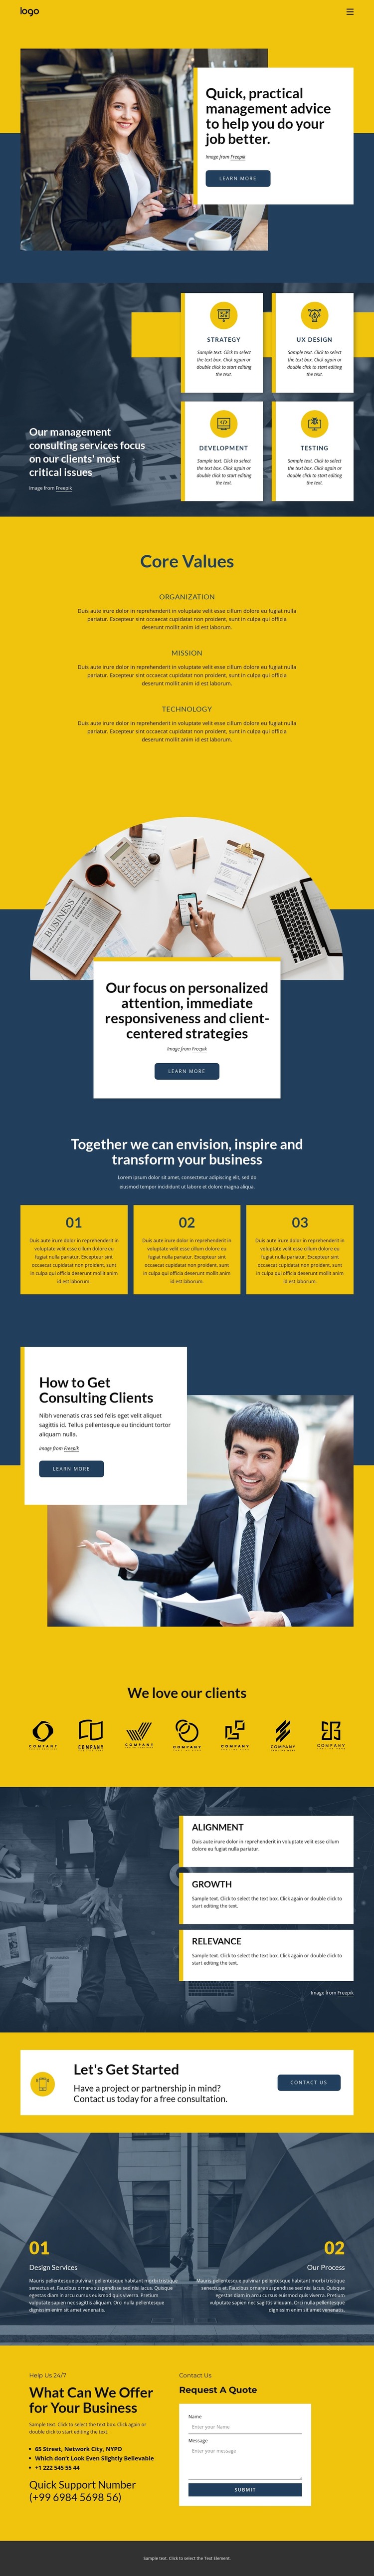 Business consulting firm WordPress Theme